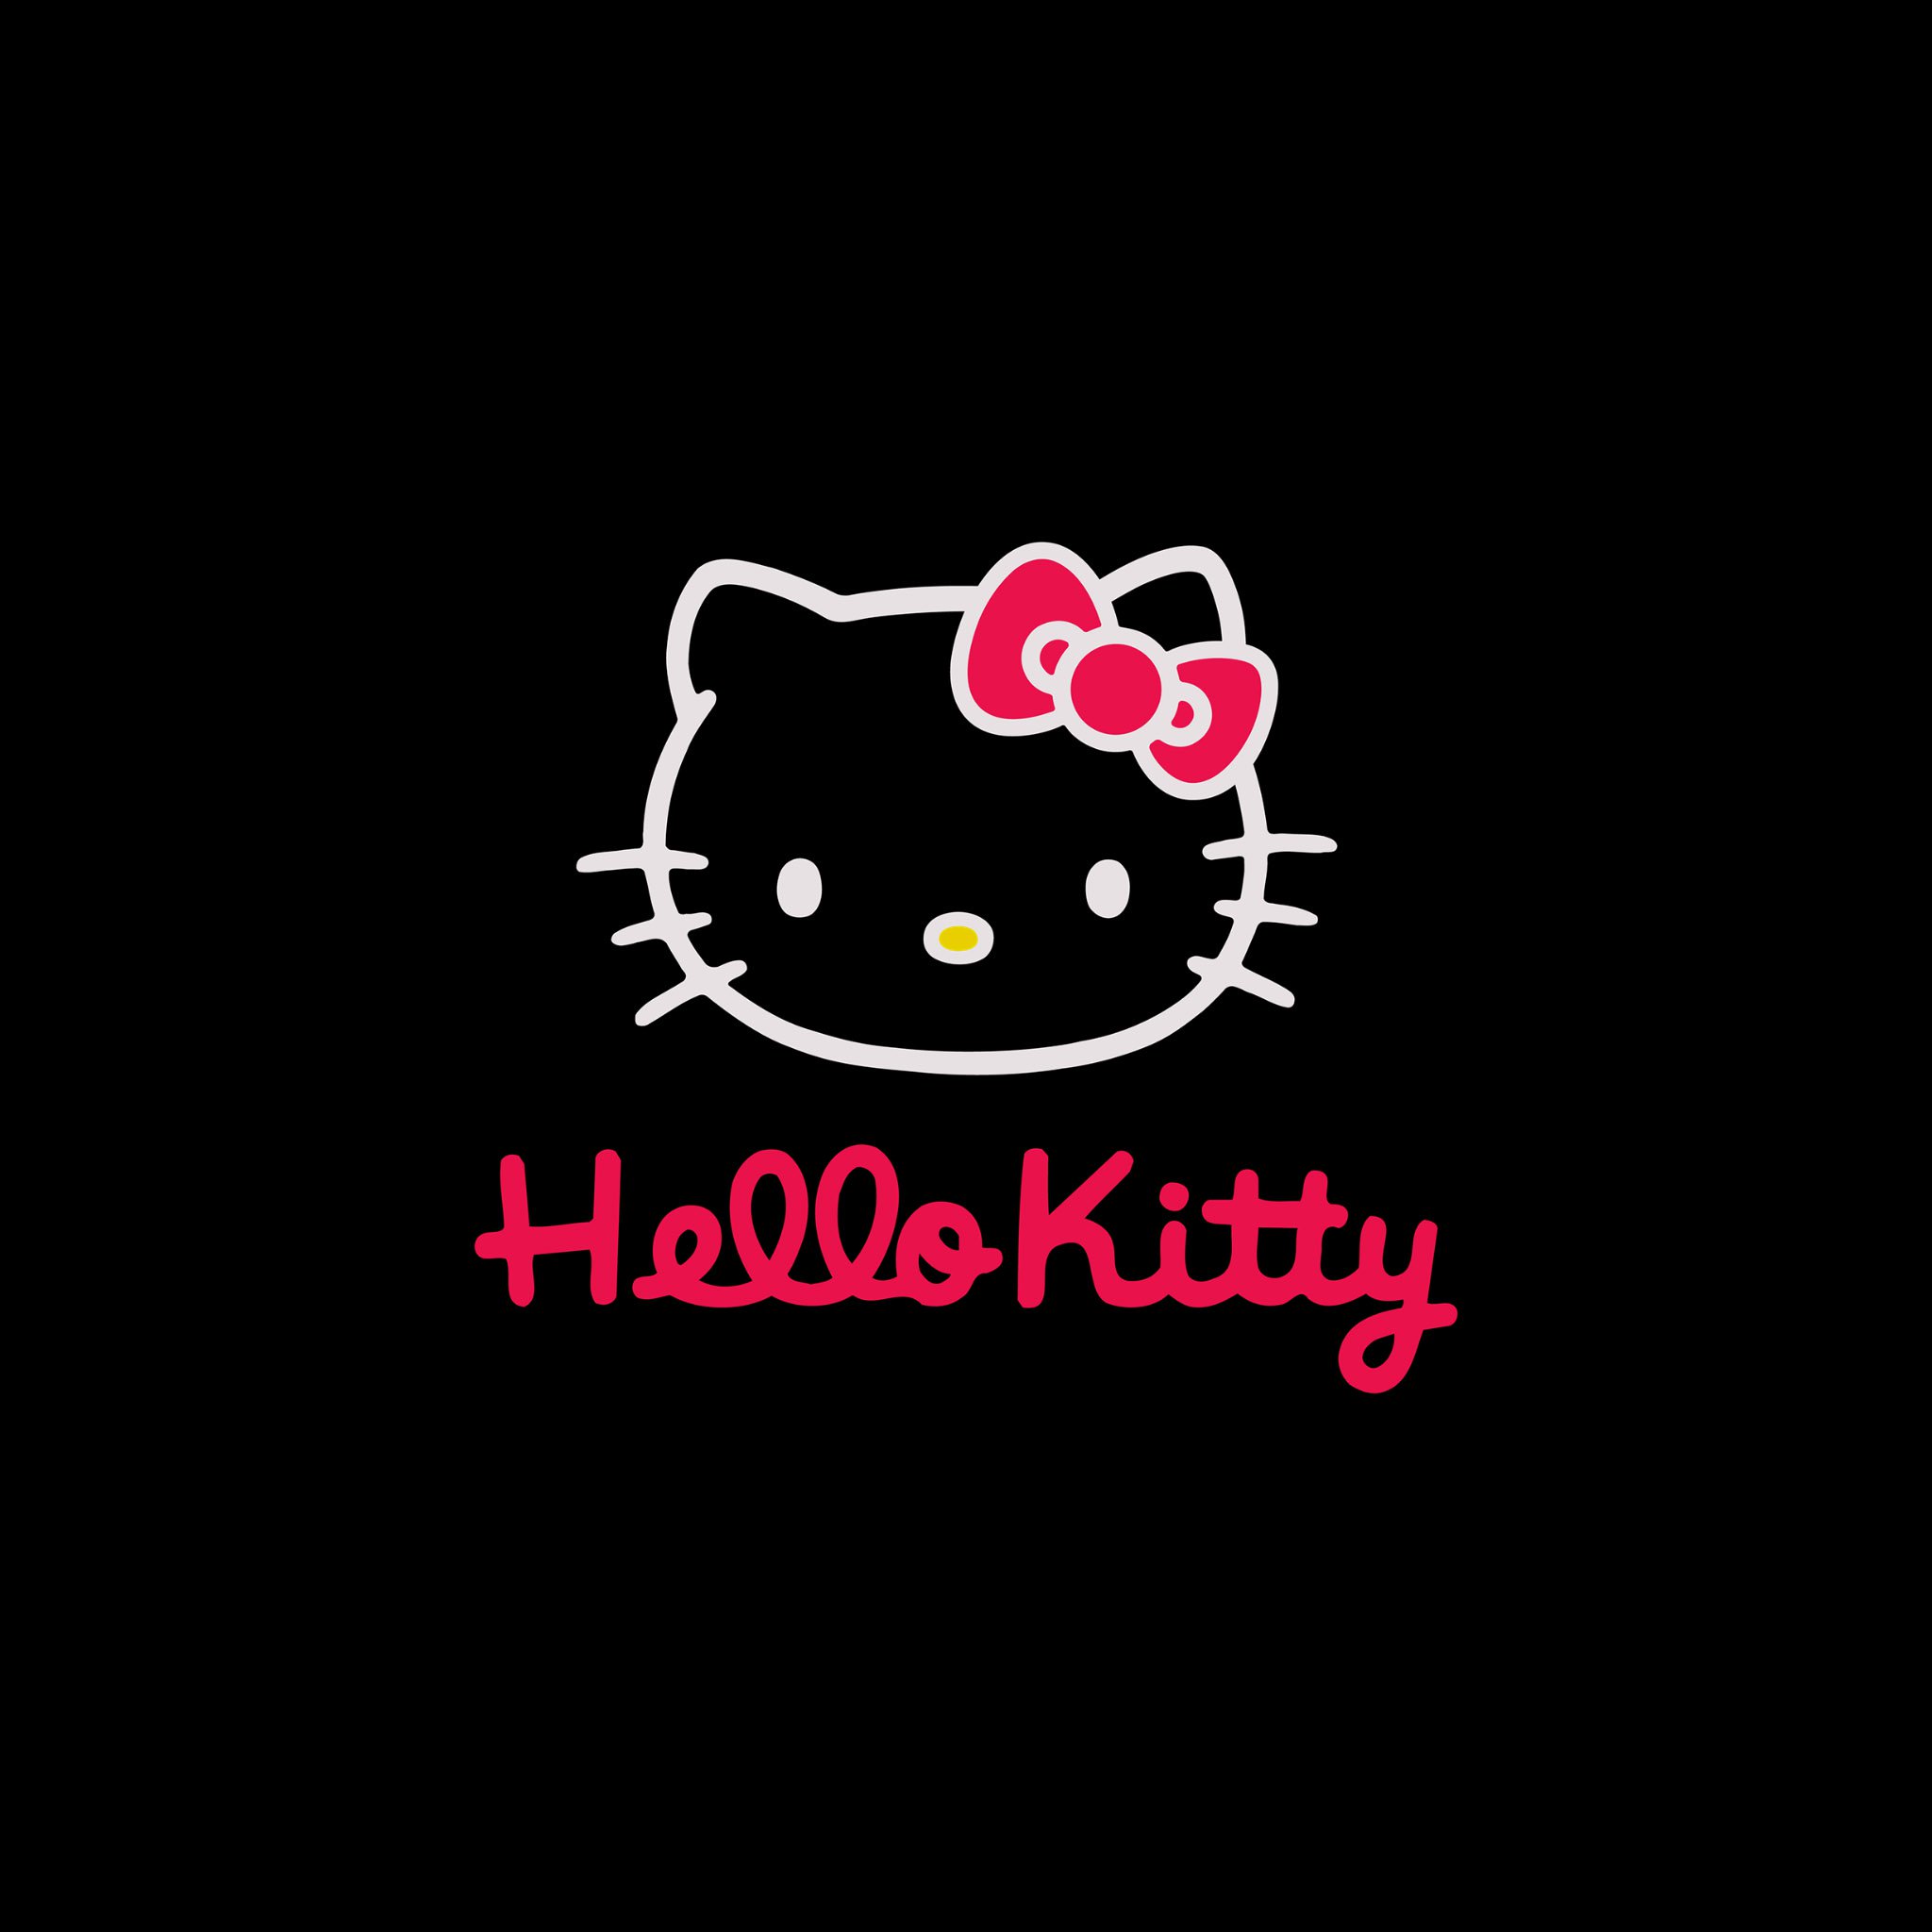 Free Download Pics Photos Black Hello Kitty Iphone Wallpaper Iphone 48x48 For Your Desktop Mobile Tablet Explore 76 Hello Kitty Black Wallpaper Wallpaper Hello Kitty Love Hello Kitty Desktop